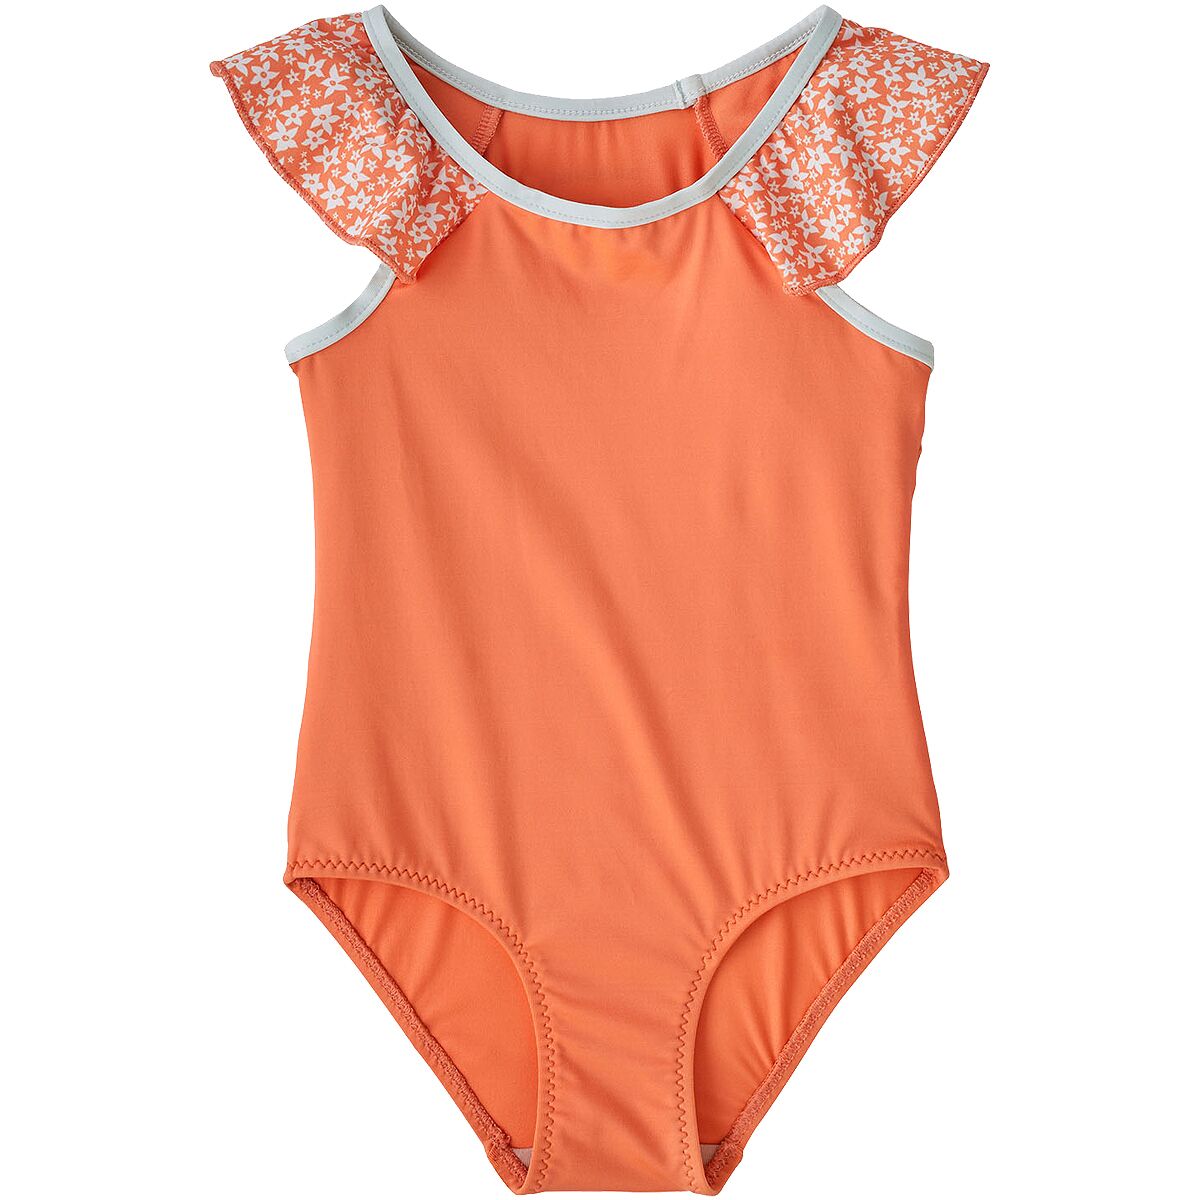 Patagonia Baby Water Sprout One-Piece Swimsuit - Toddler Girls'